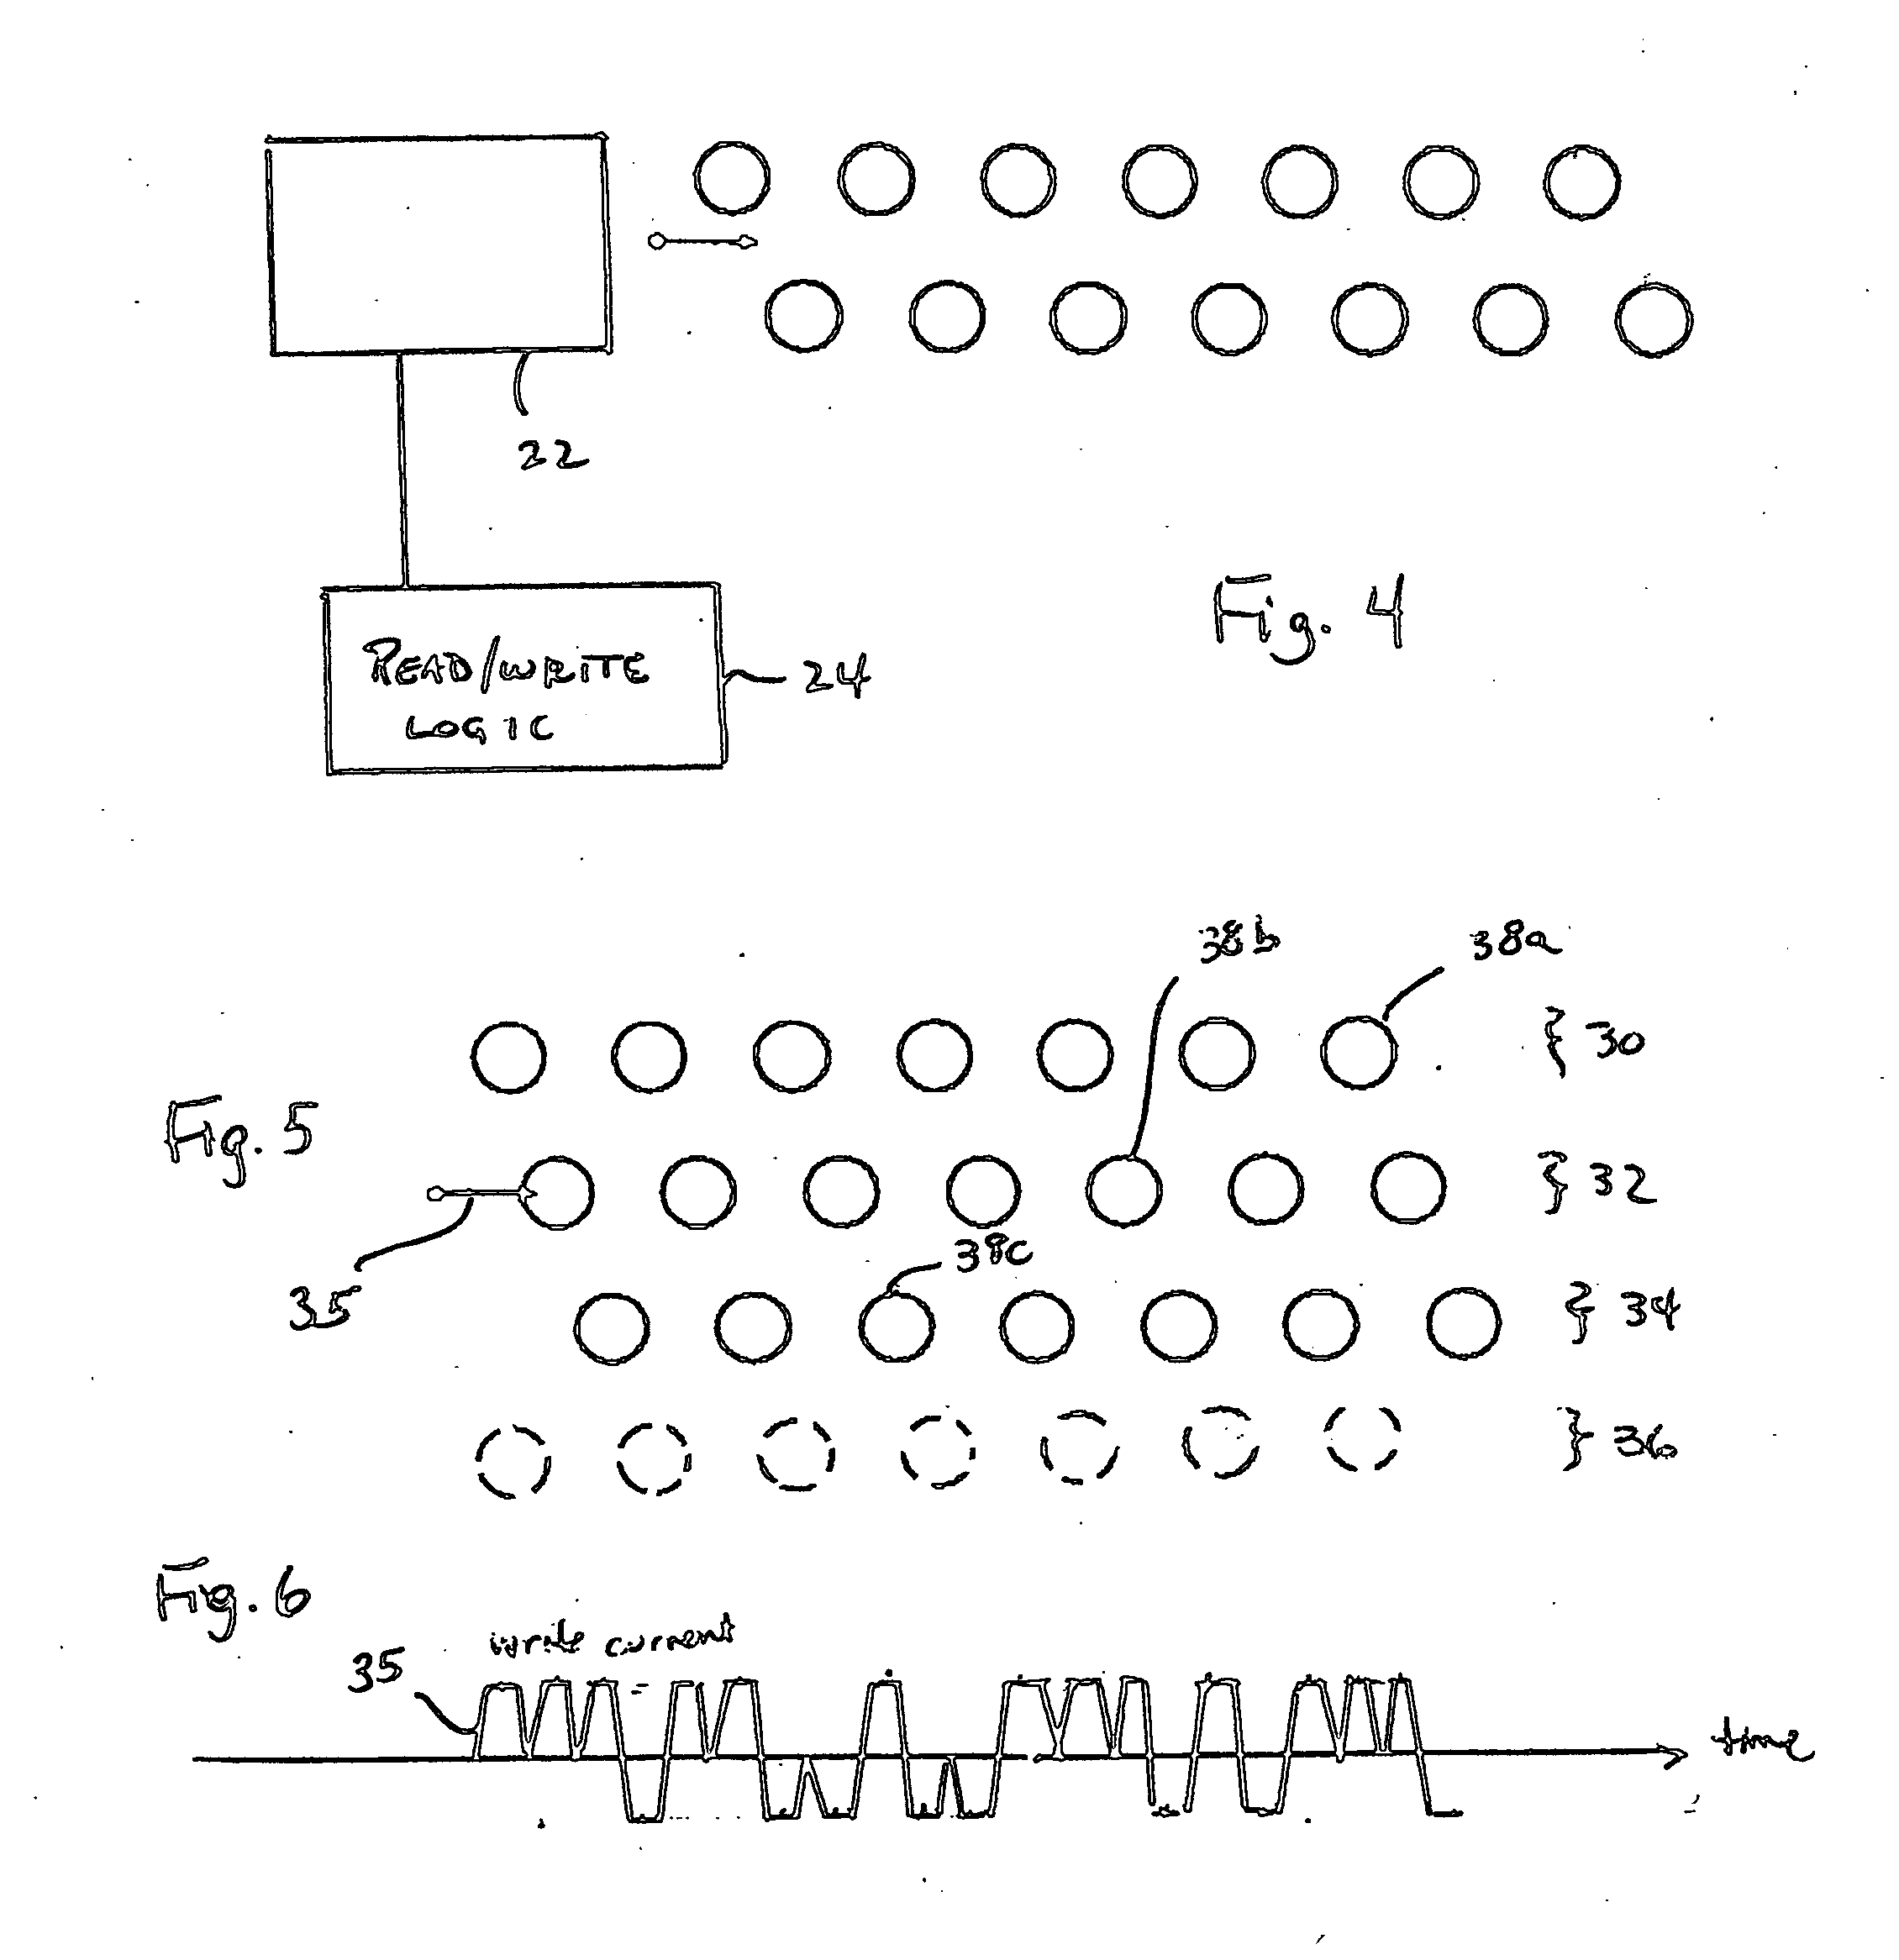 Data storage device with bit patterned media with staggered islands